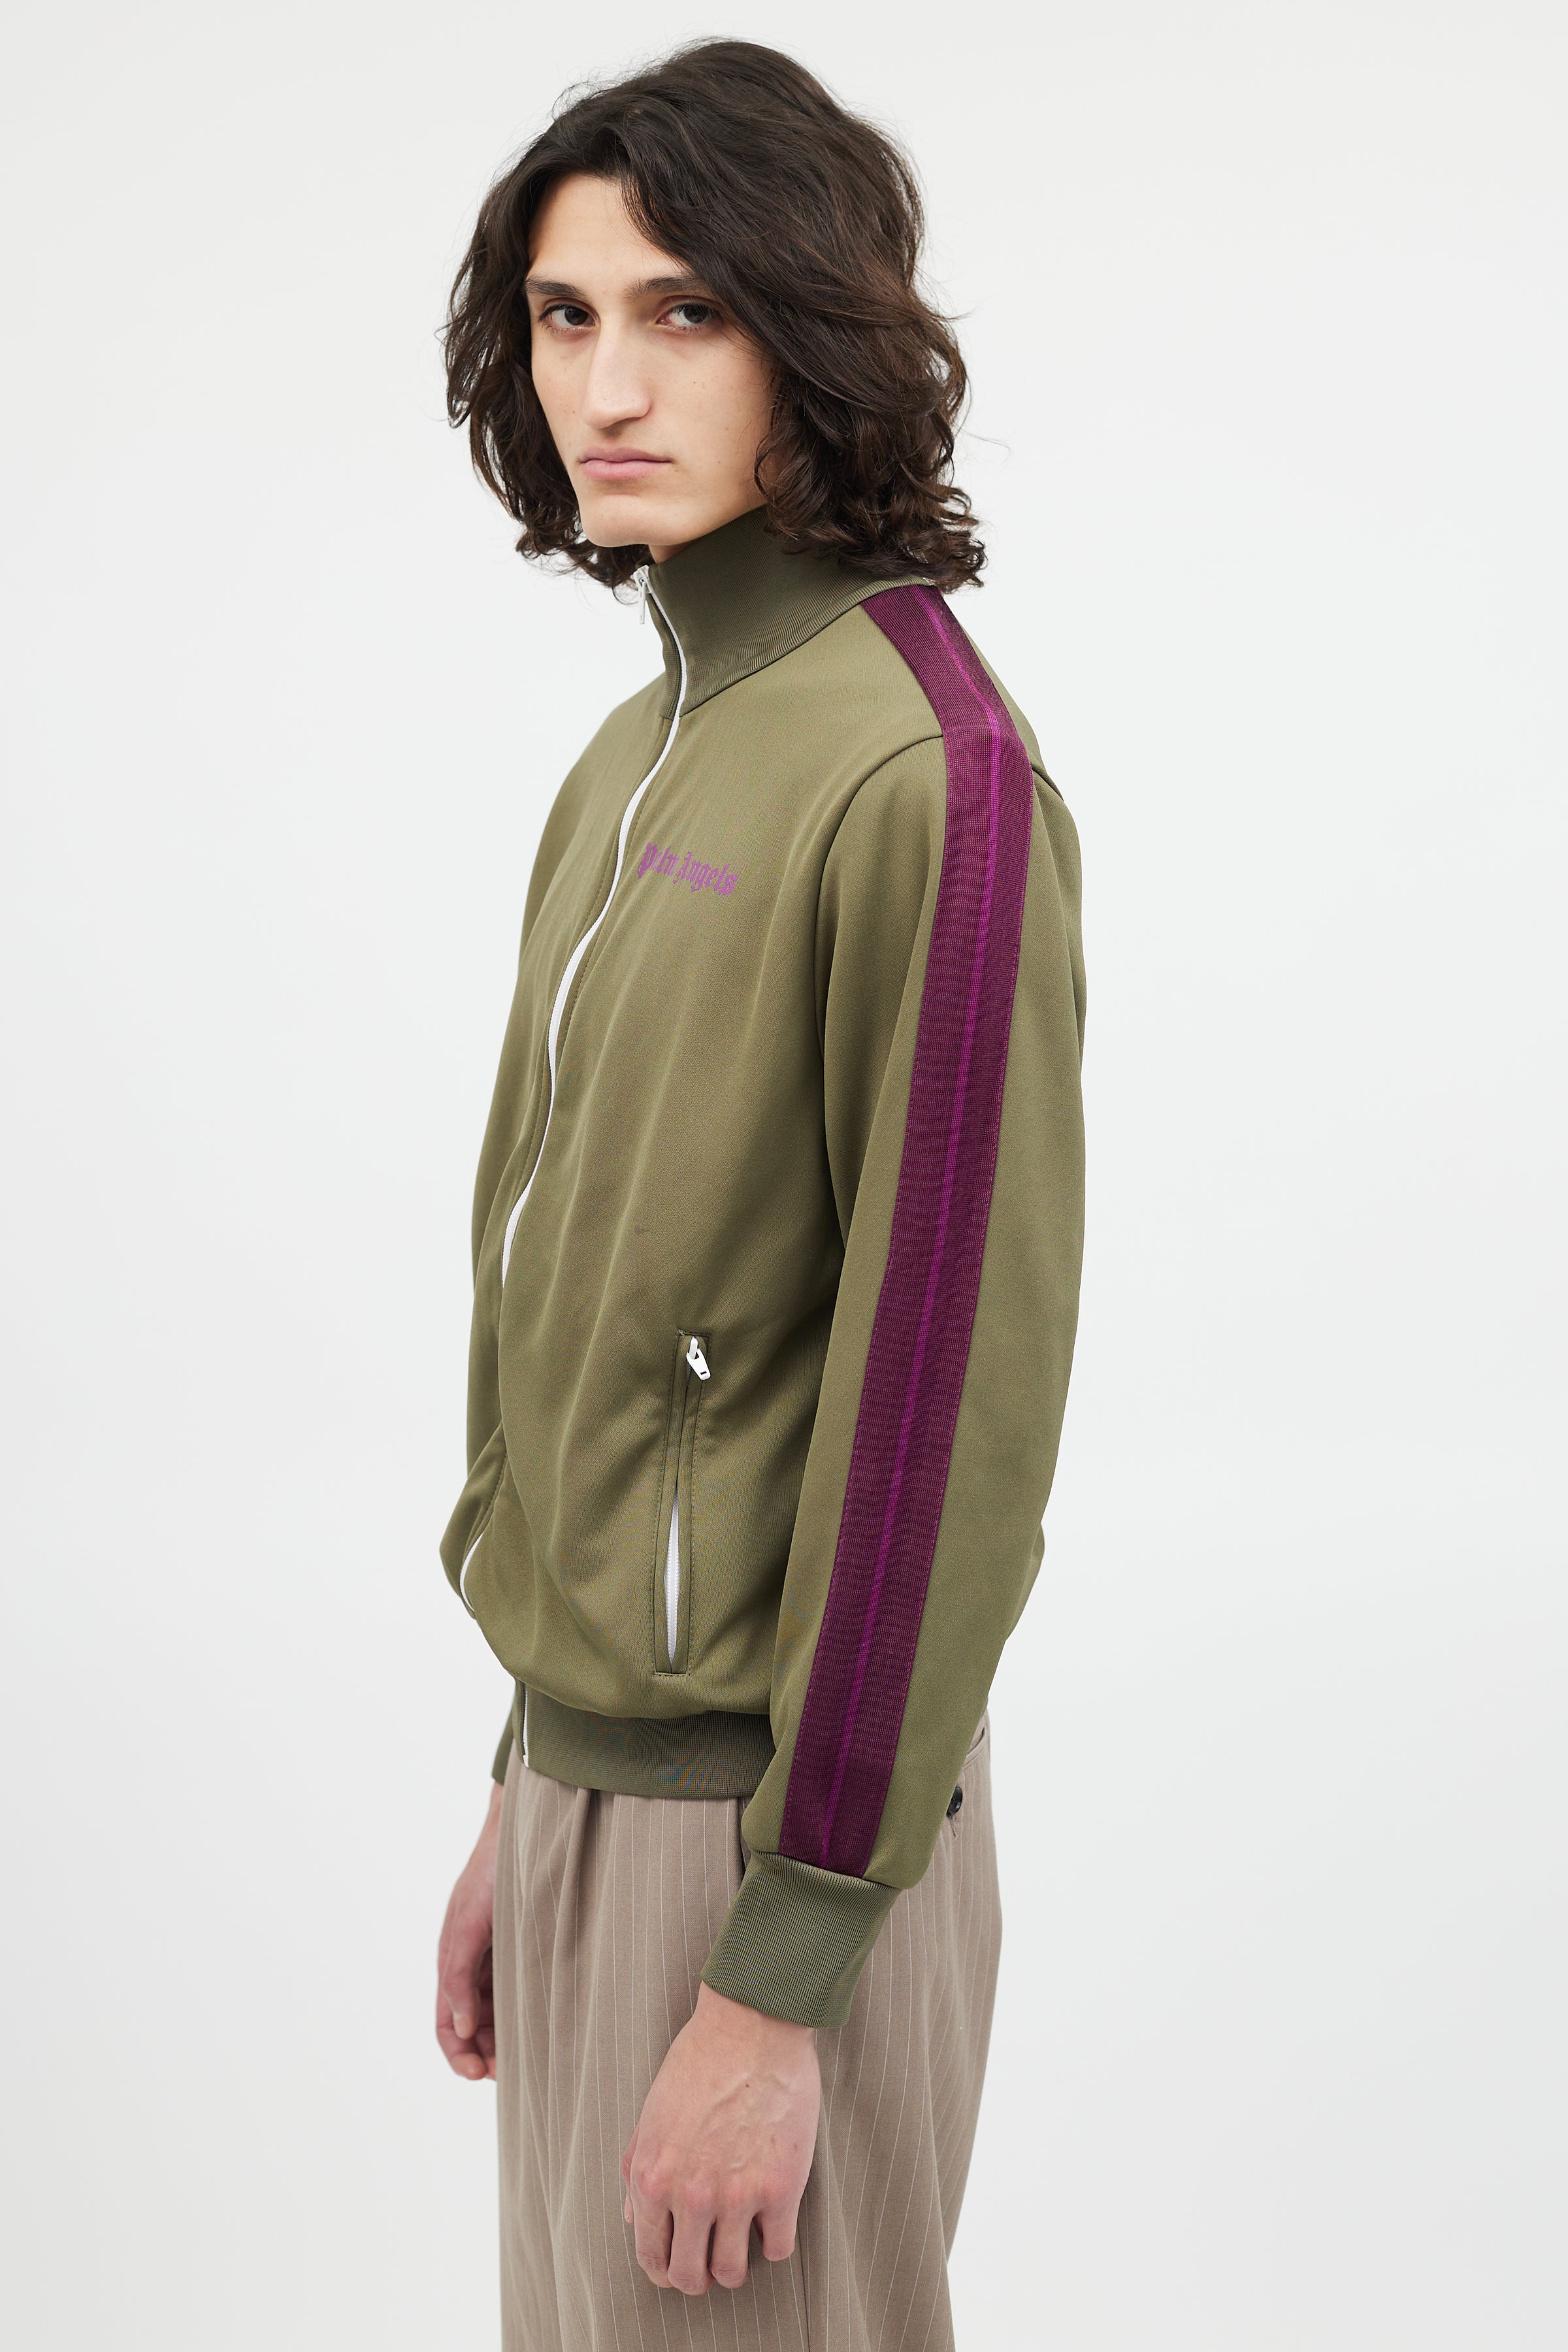 Palm Angels // Green & Purple Zip Up Jacket – VSP Consignment